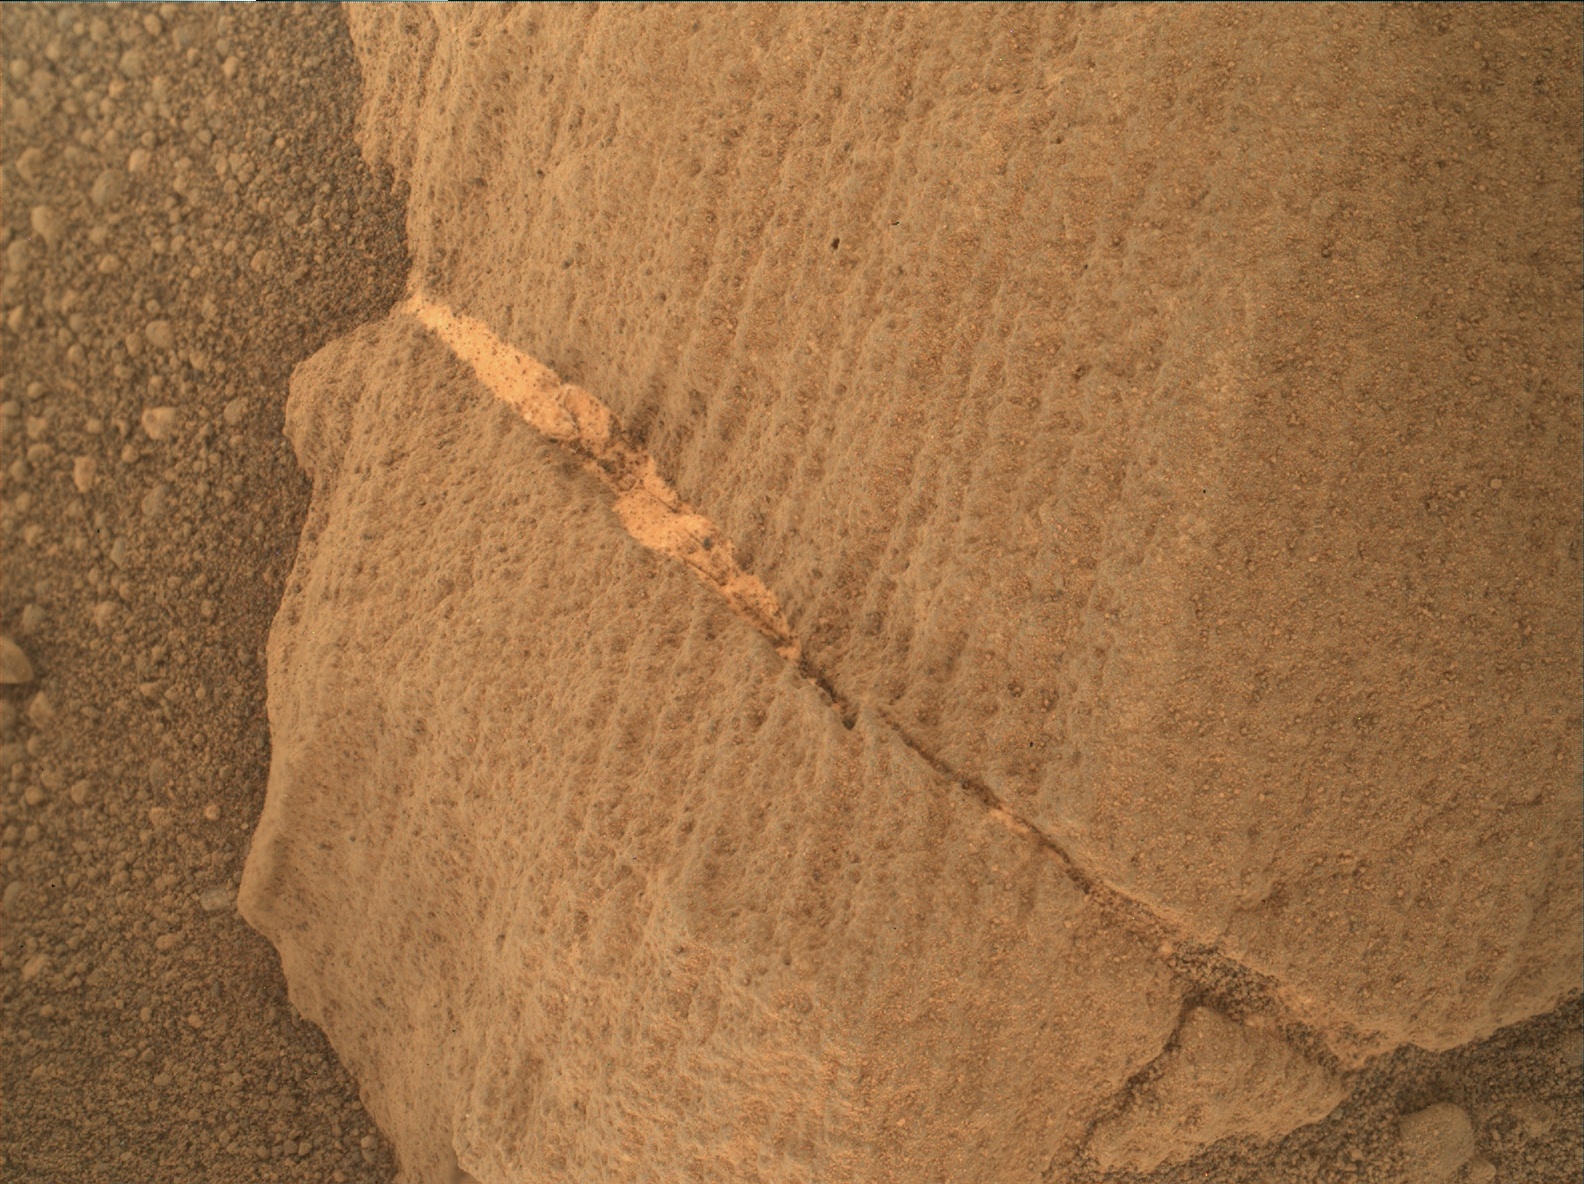 Nasa's Mars rover Curiosity acquired this image using its Mars Hand Lens Imager (MAHLI) on Sol 696